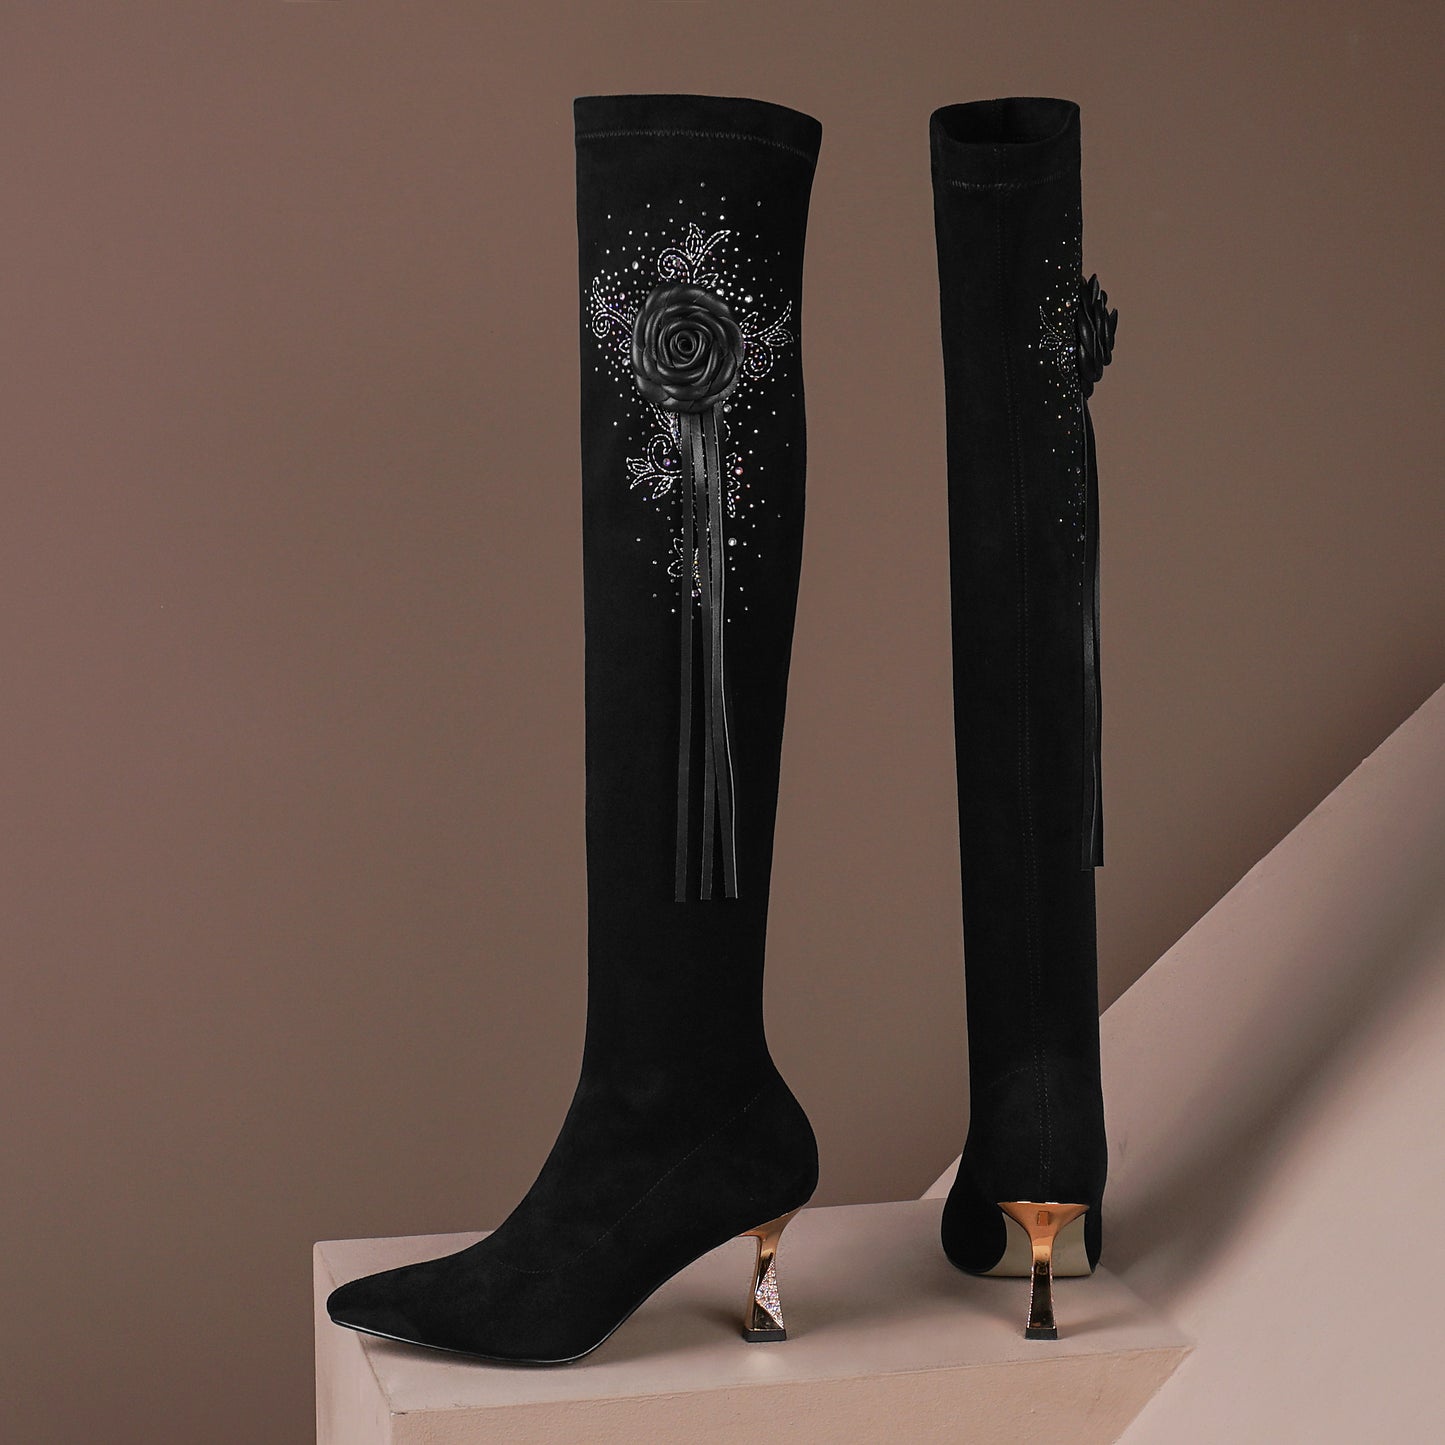 TinaCus Women's Handmade Suede Leather Pointed Toe Sexy High Heel Stretch Slip On Black Over the Knee High Boots with Floral Tassel